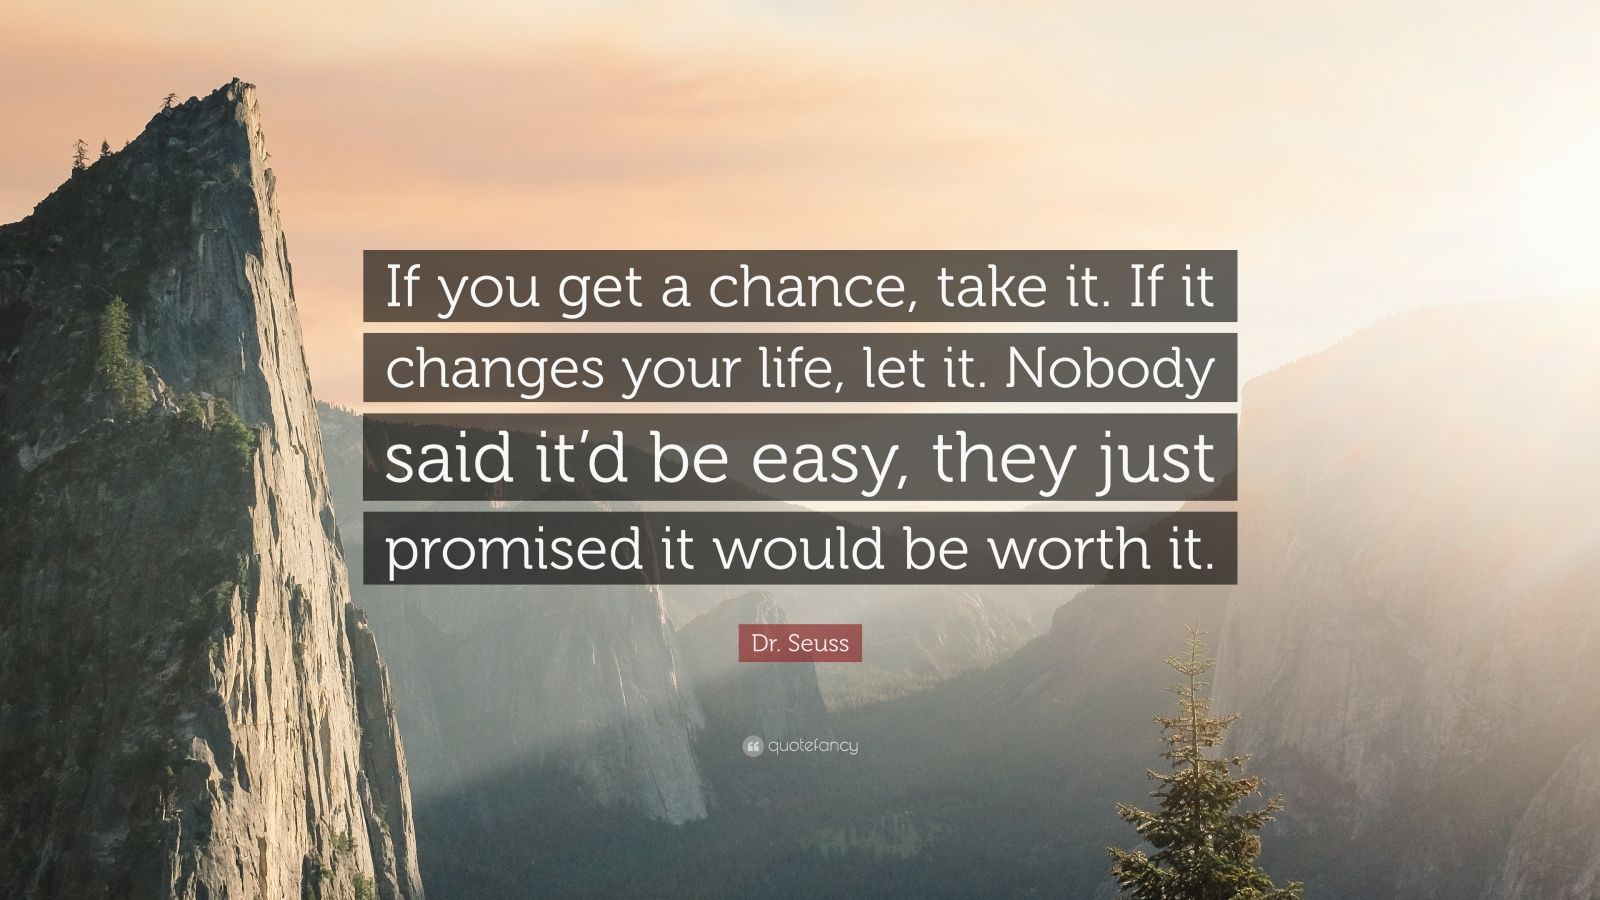 Dr. Seuss Quote: “If you get a chance, take it. If it changes your life